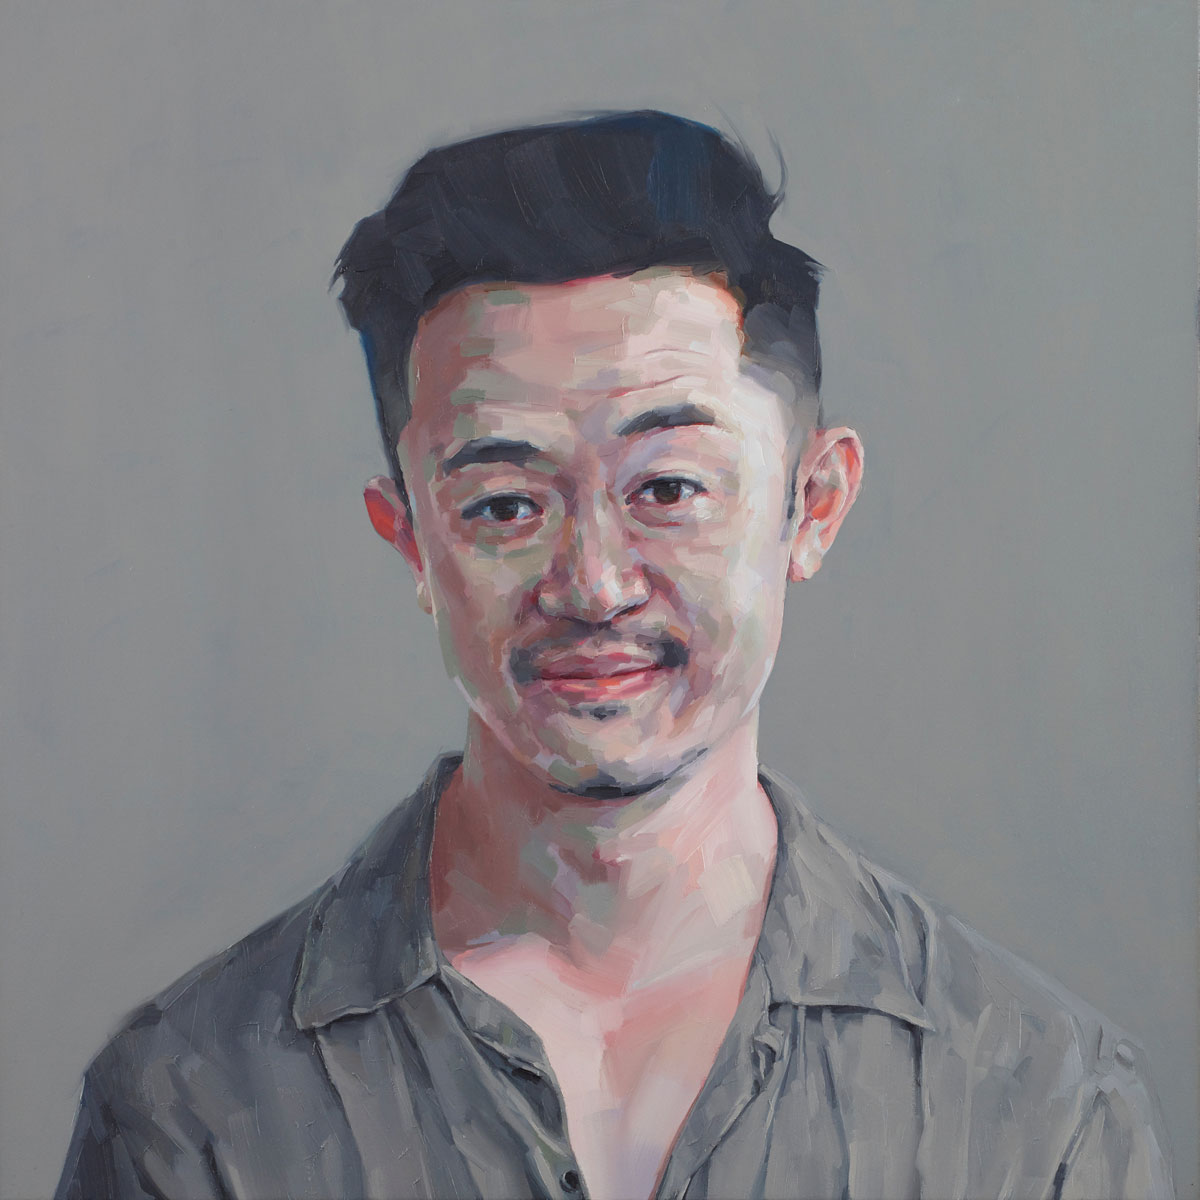 Painted portrait of man with black hair wearing a grey collared shirt.